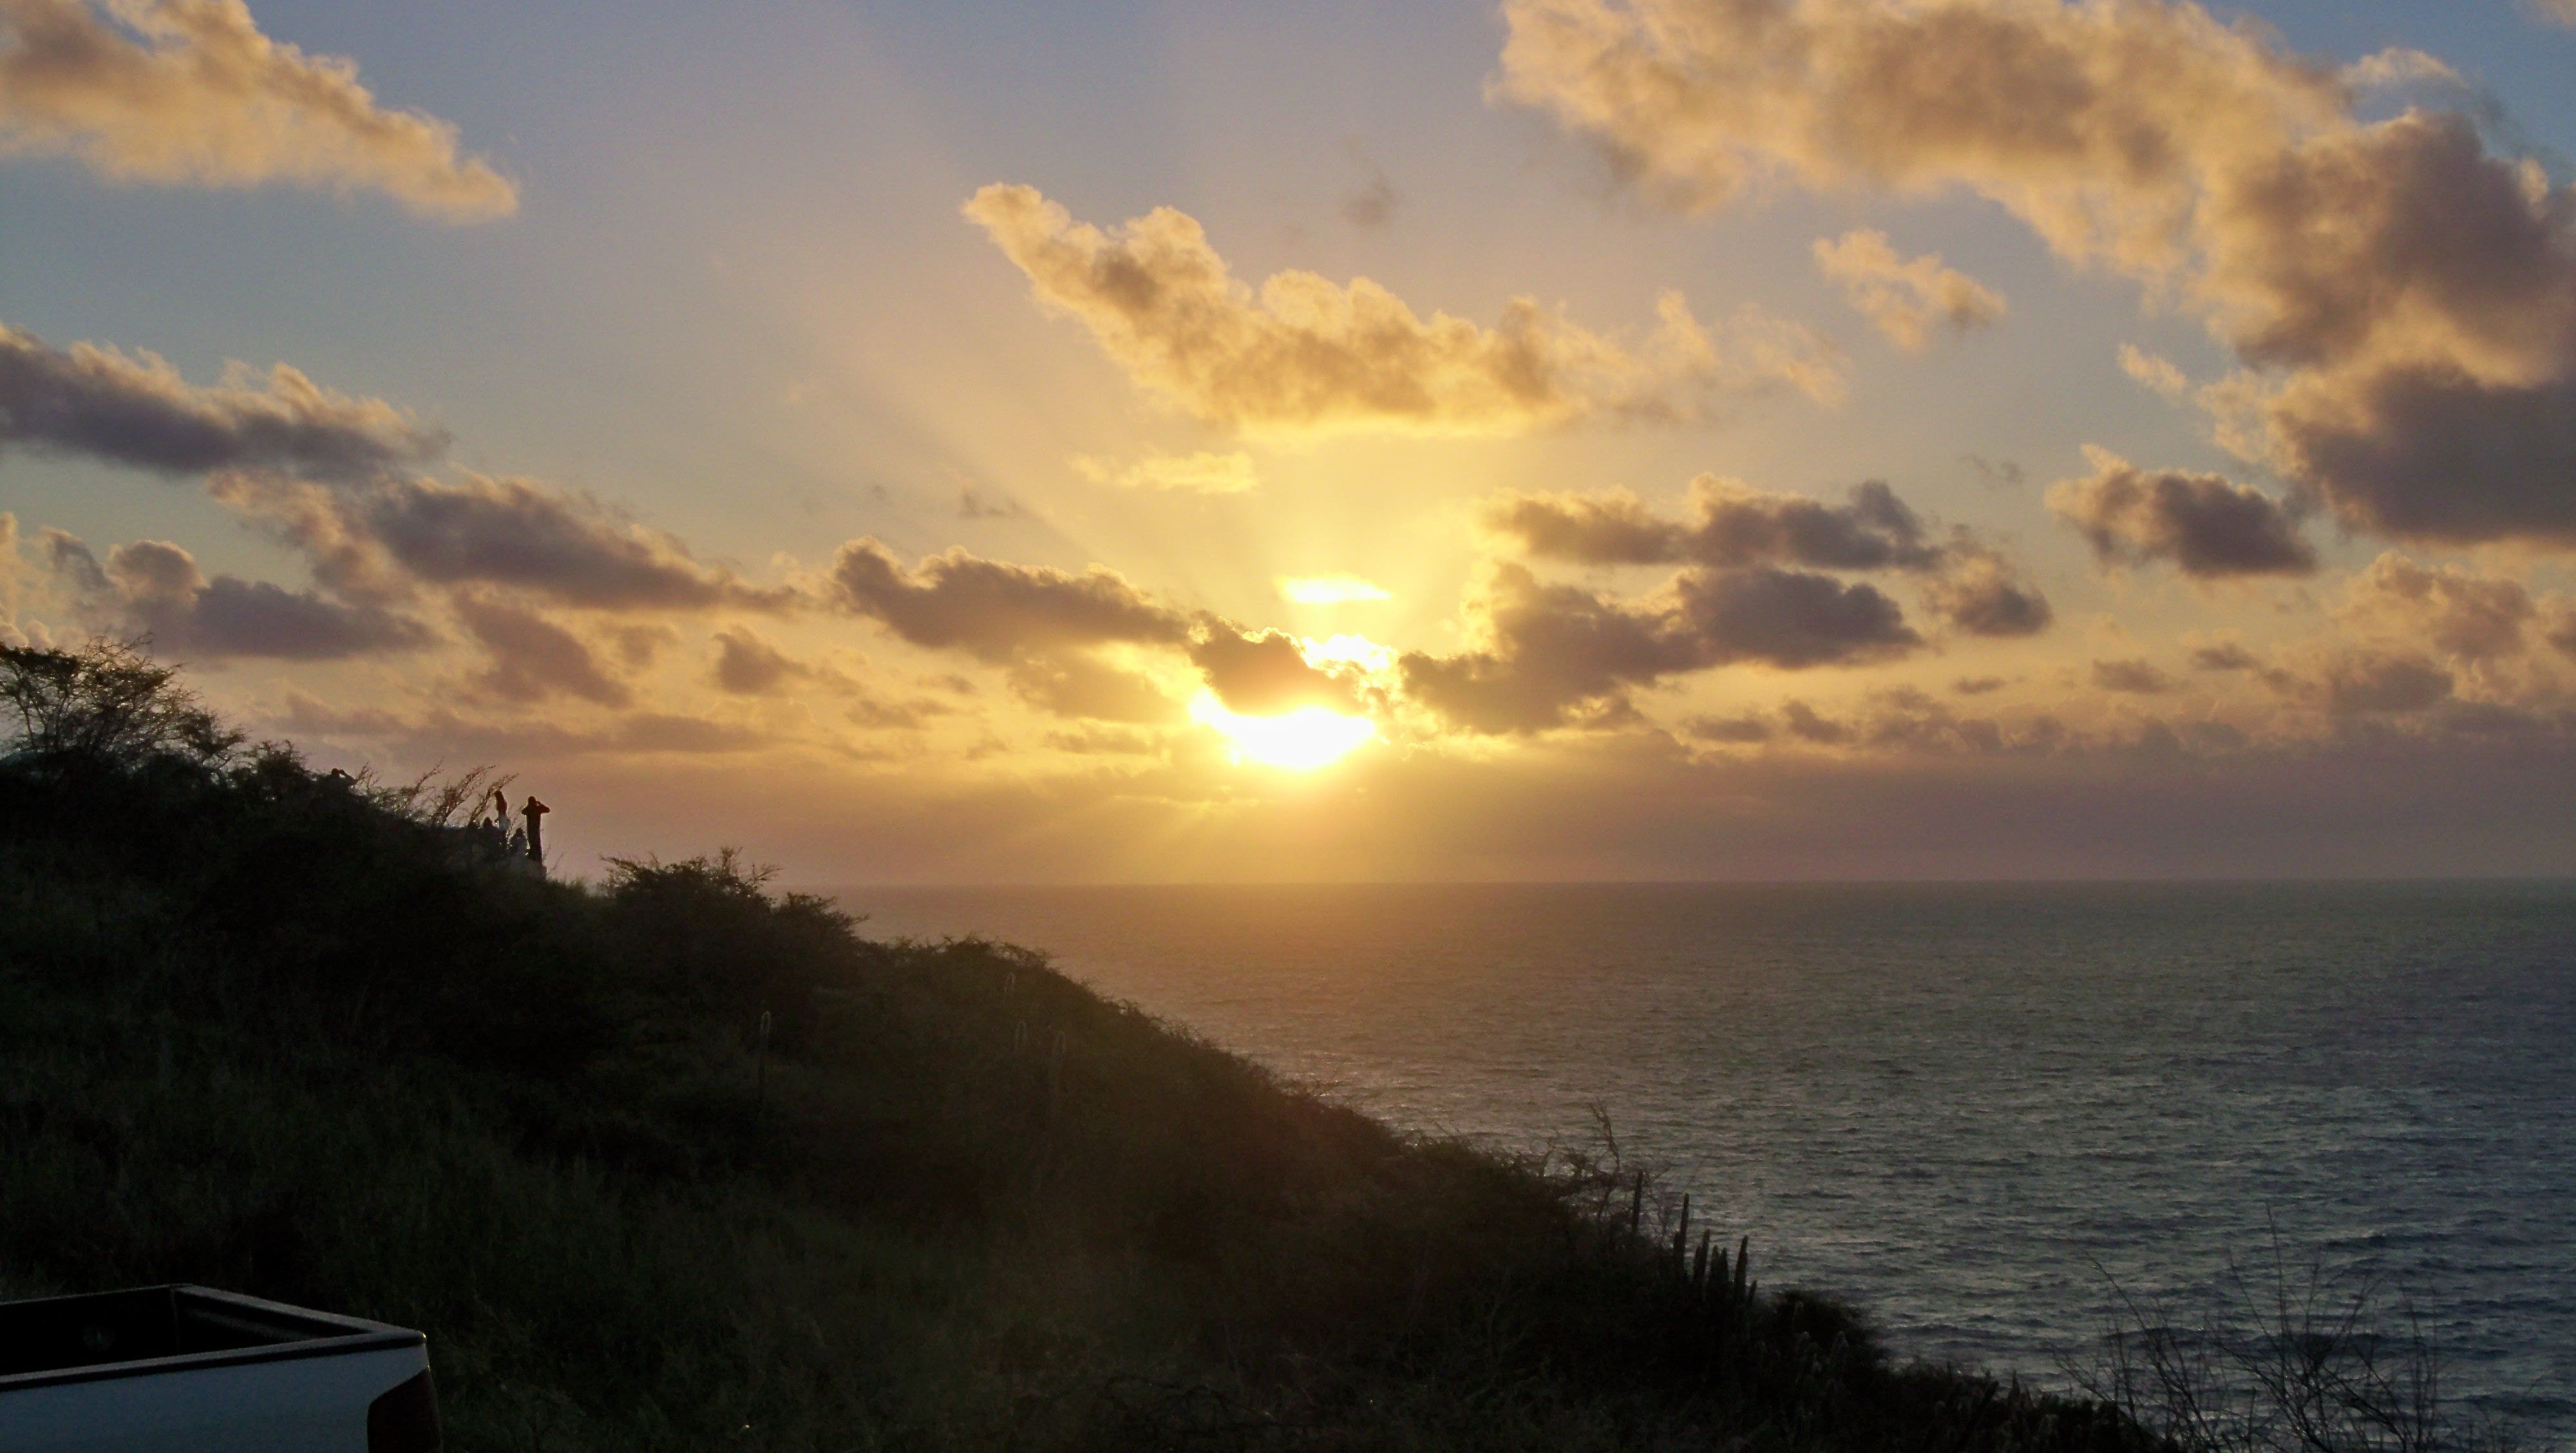 The golden sun rises over the Caribbean on the first day of the new year. (Carol Buchanan photo)